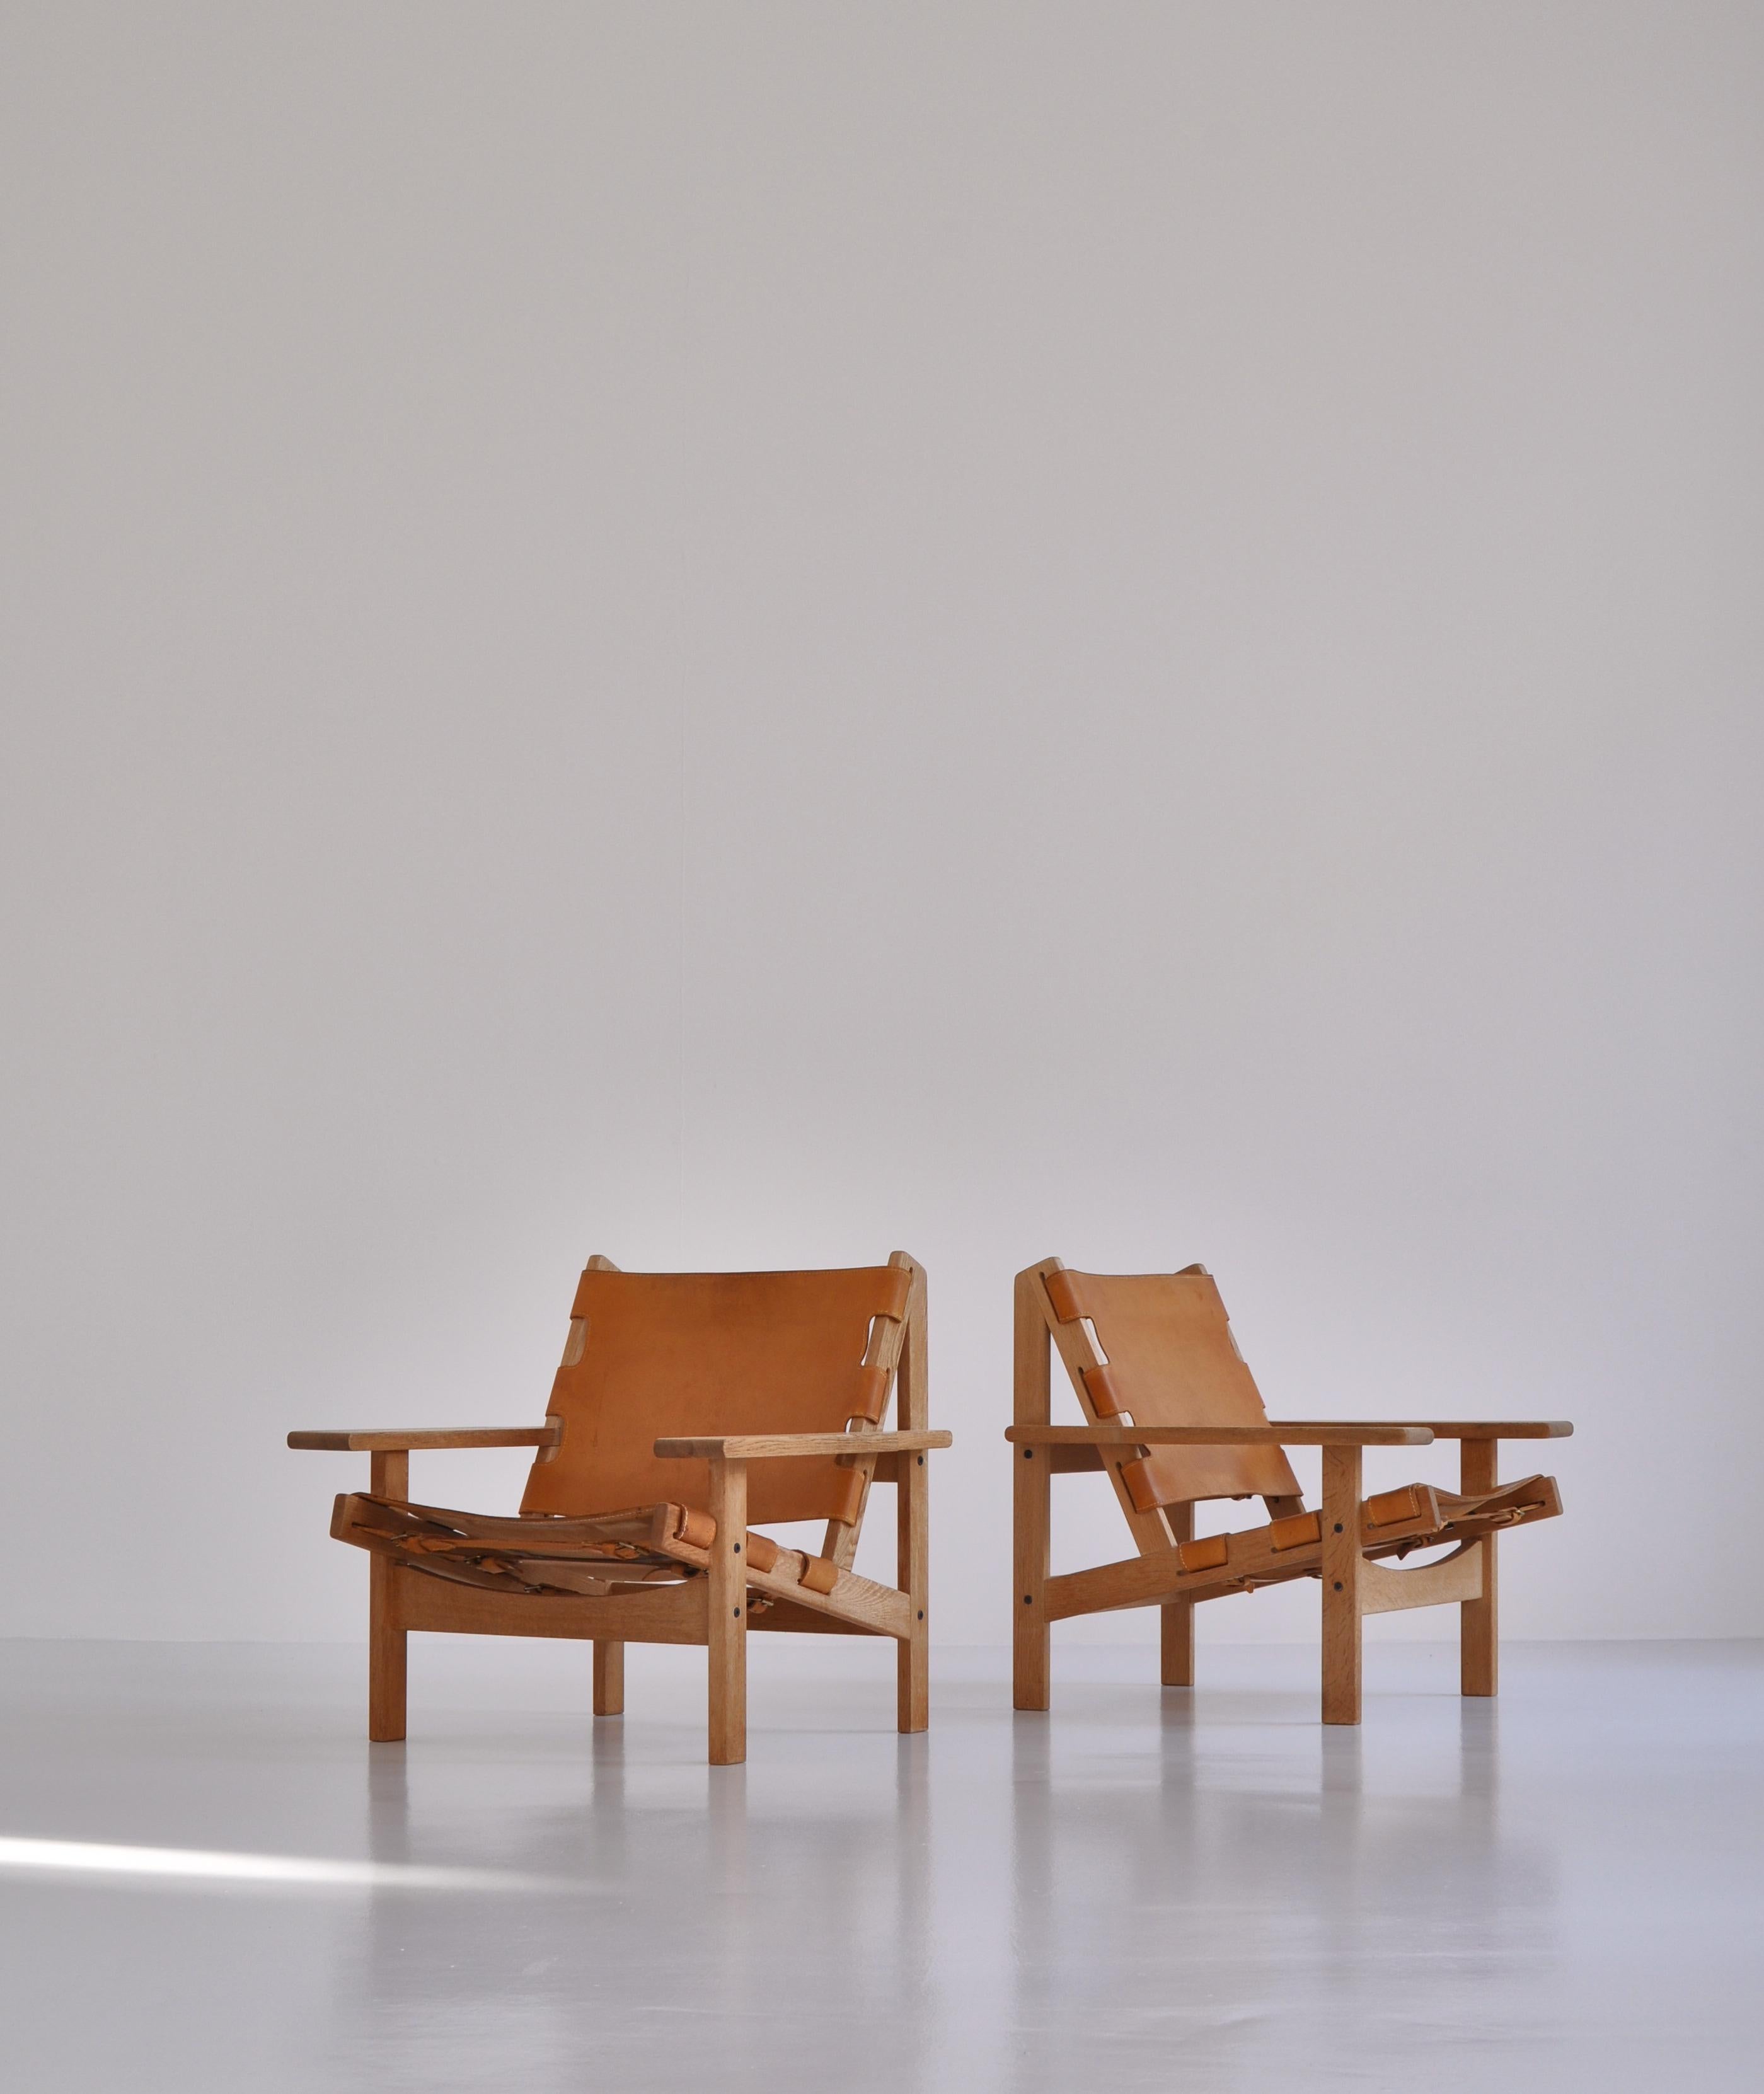 Rare pair of hunting chairs in oak and saddle leather manufactured by KP-Møbler (KP-furniture) in the 1960s. Made by Danish architect Kurt Østervig. All original condition with beautiful rich patina to both oak and leather.